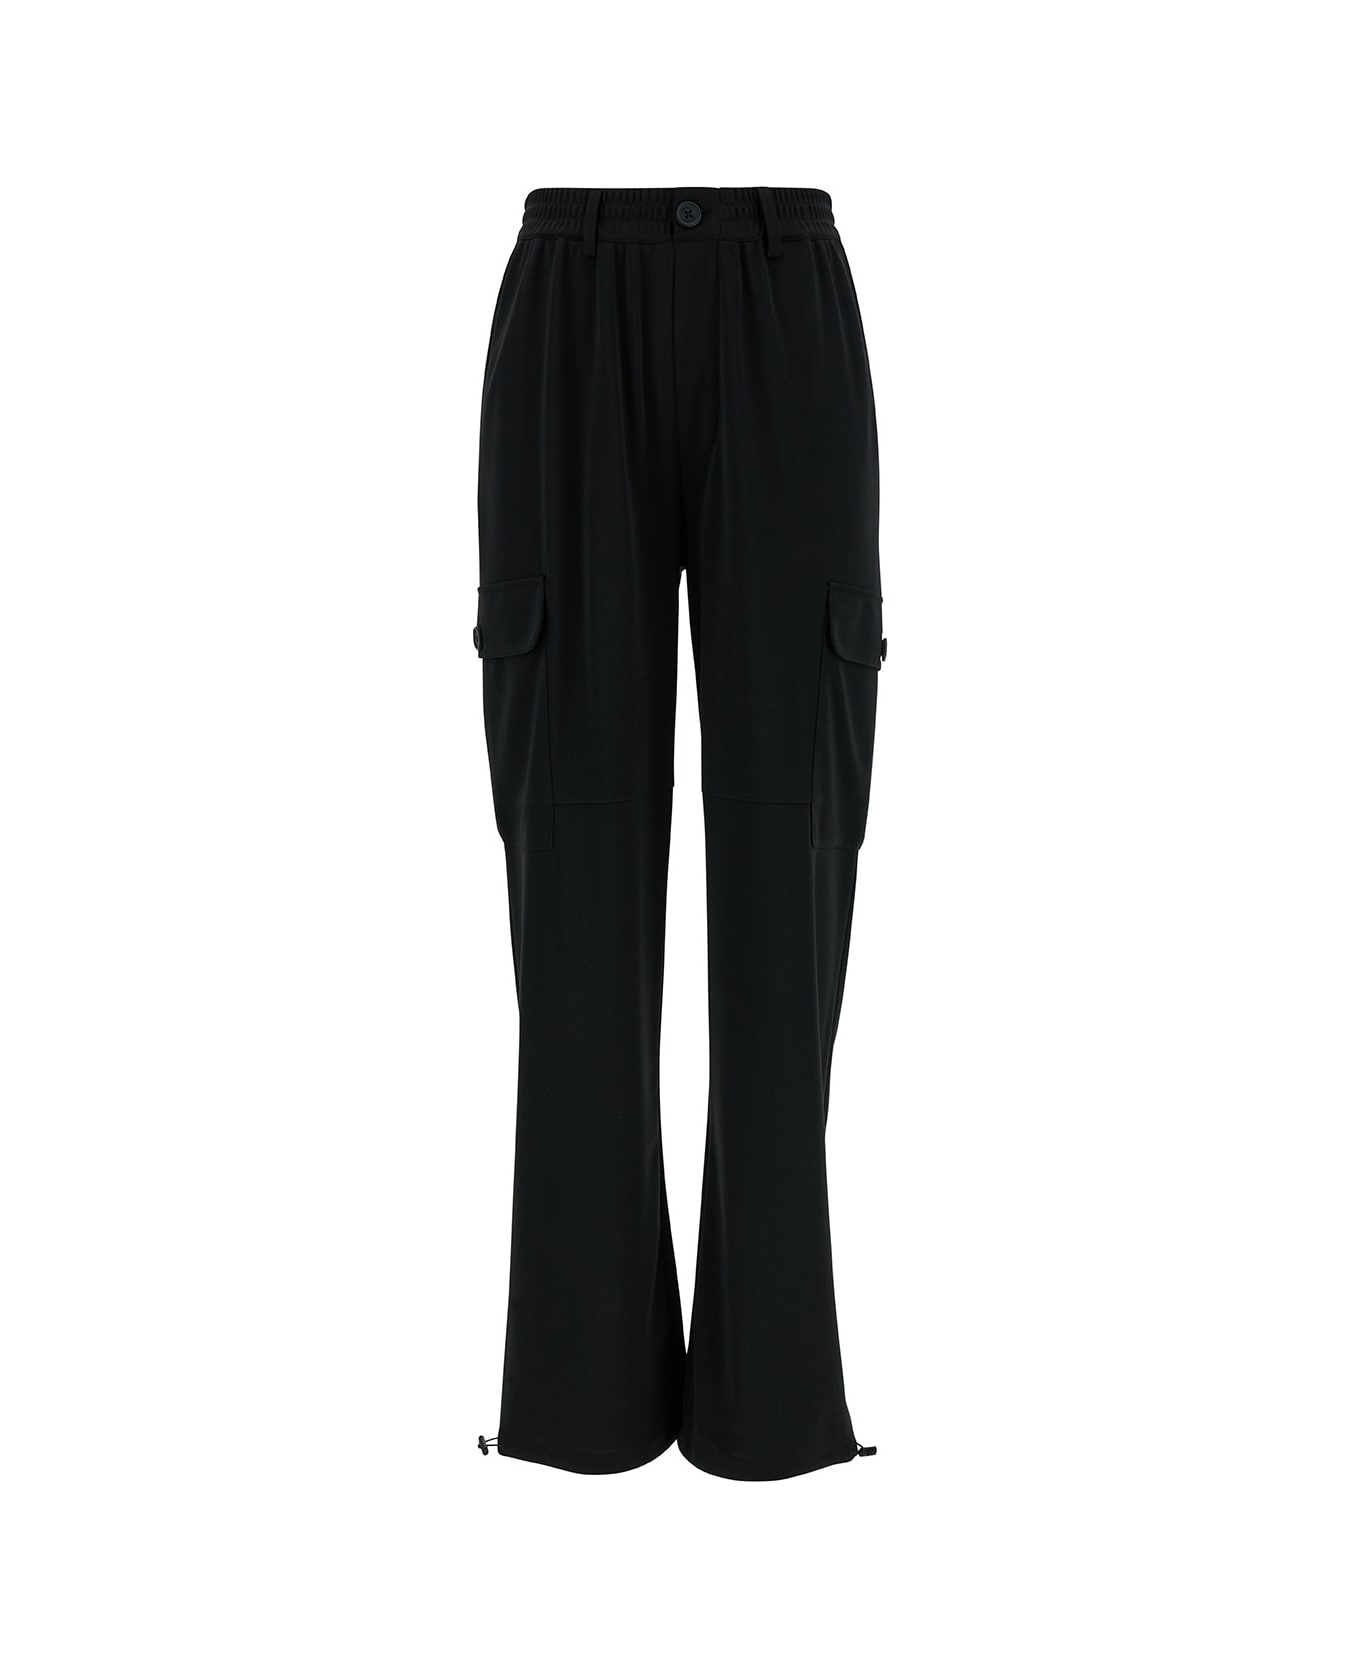 TwinSet Black Cargo Pants With Oval T Patch In Tech Fabric Woman TwinSet - BLACK ボトムス